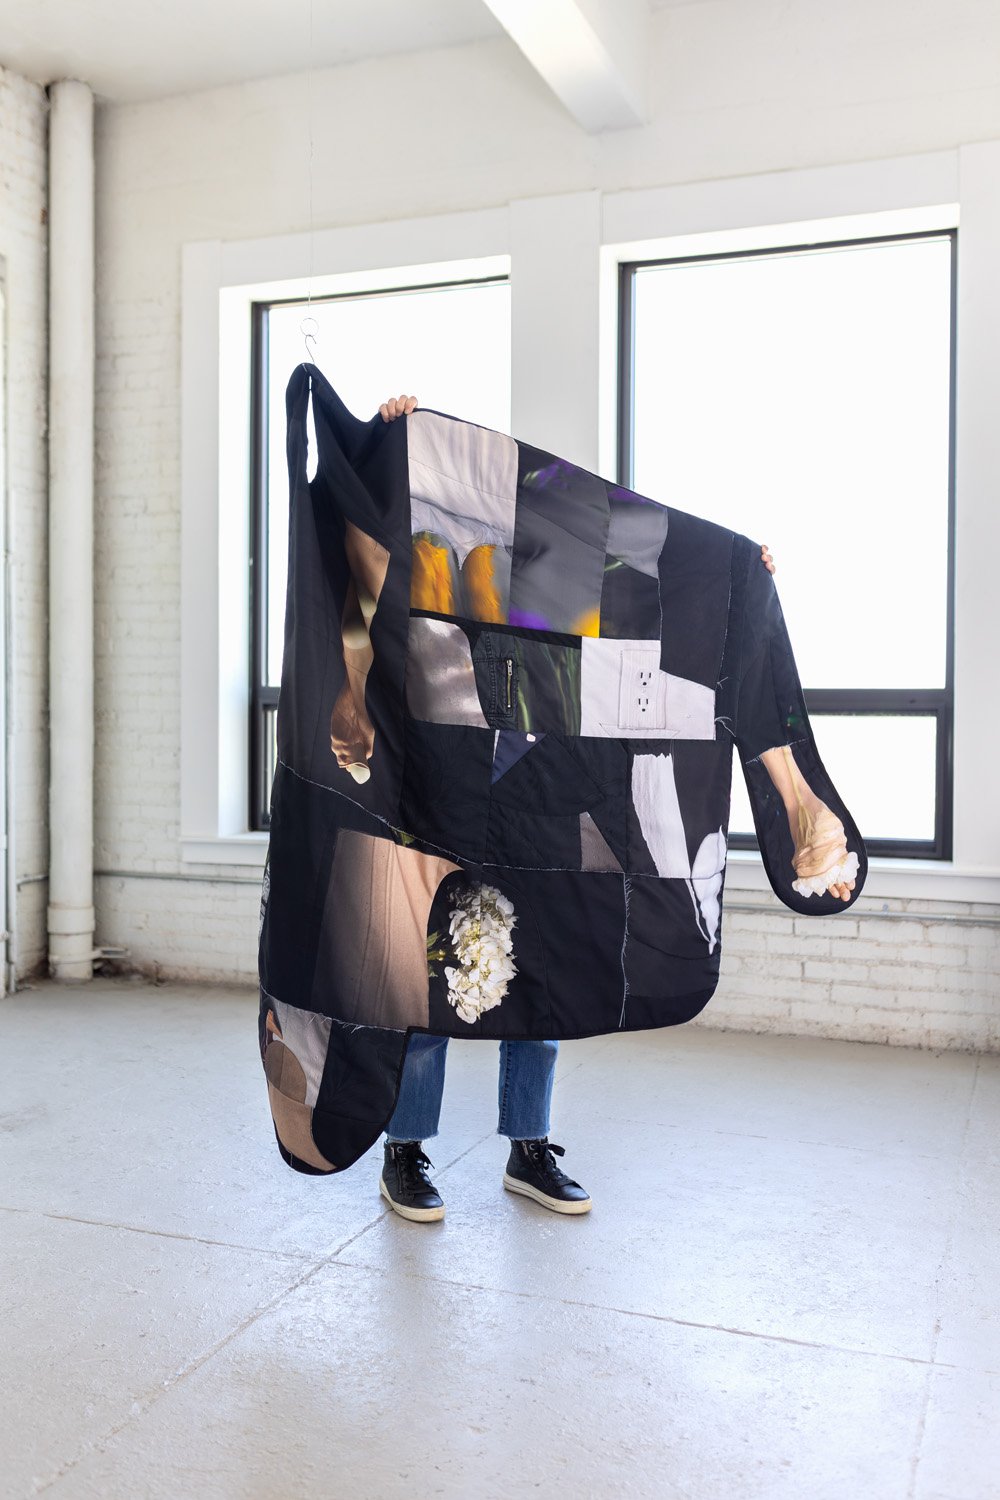 'Vent', photographs printed on fabric, old clothes, cut, pieced, and sewn, cotton batting, polyester filling, 62” x 61” (open), 68” x 19” x 15” approx. (hanging)